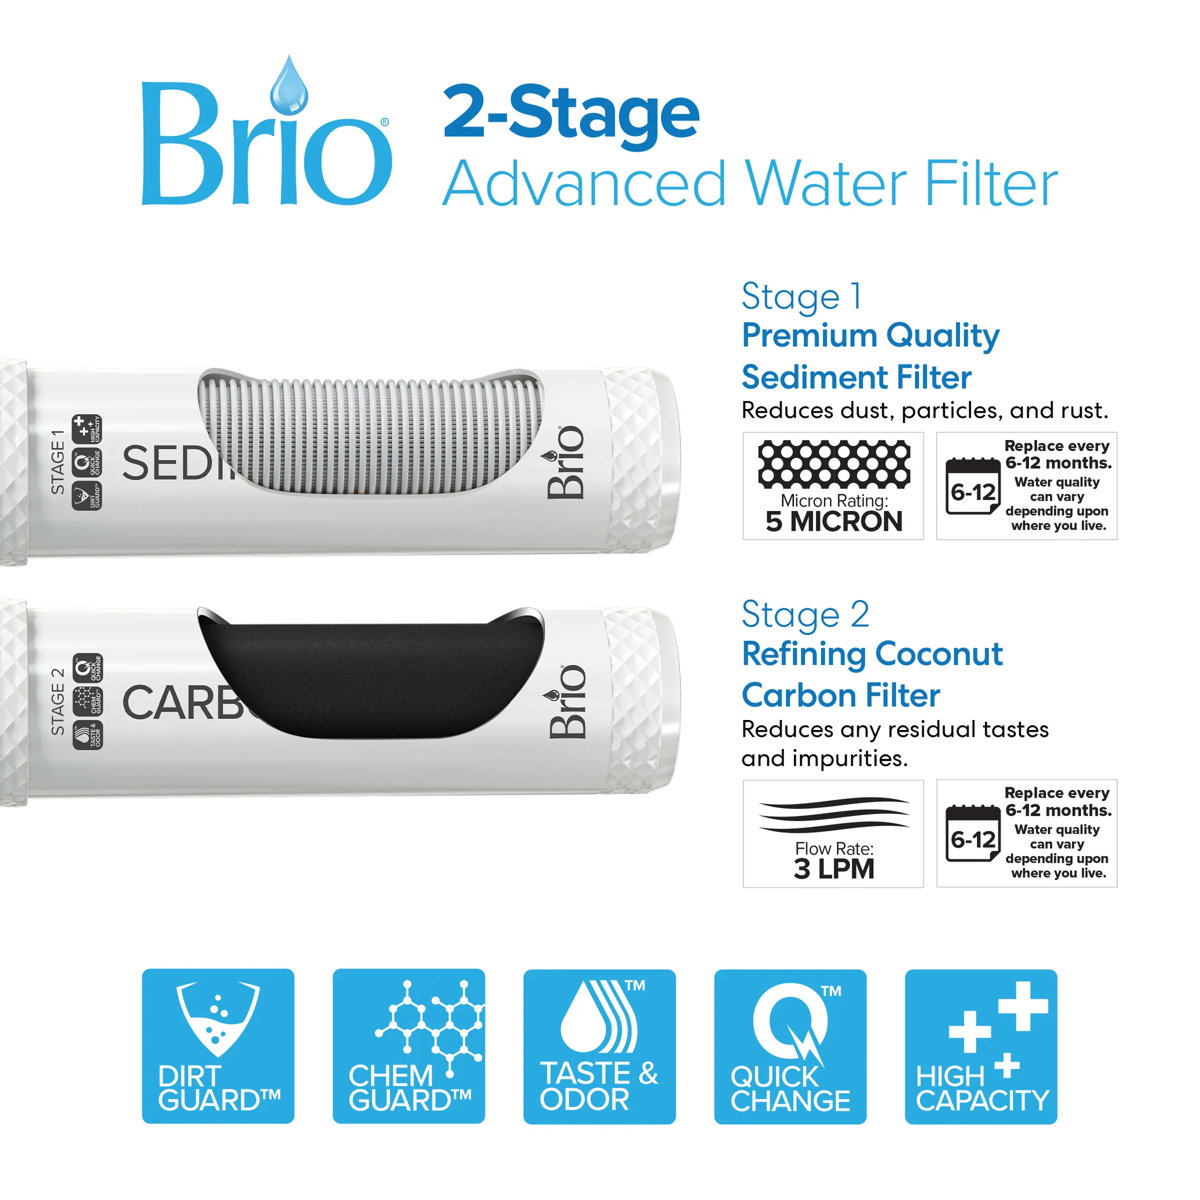 Brio point of use cooler